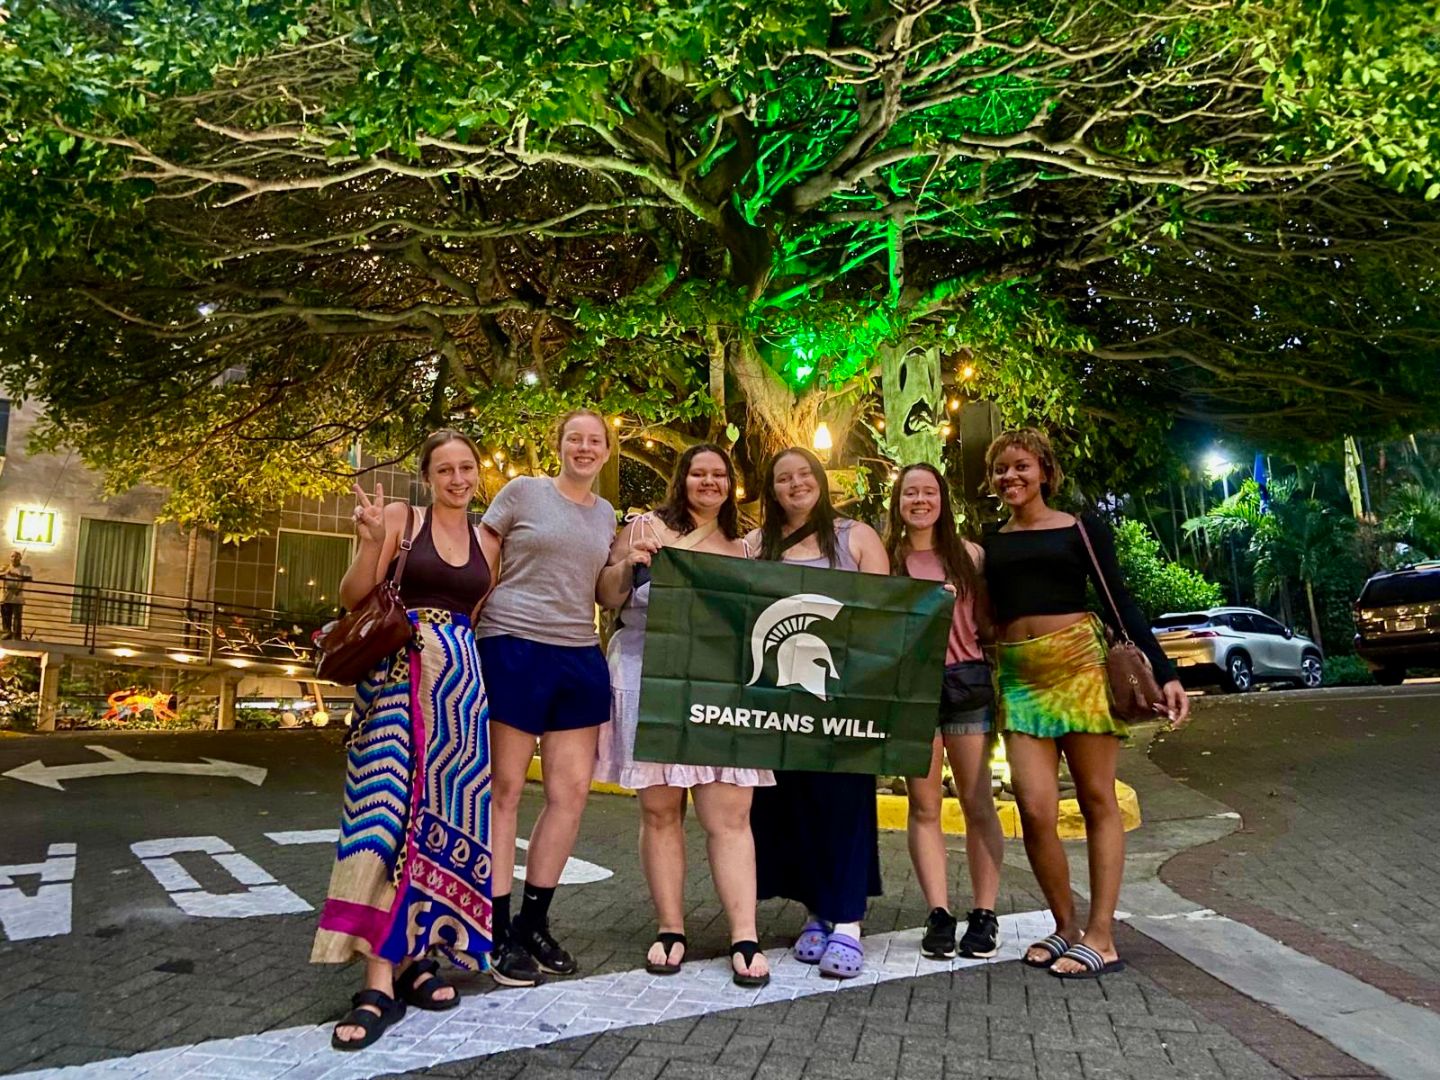 Group of students holding Spartan flag at night under a tree lit with green lights